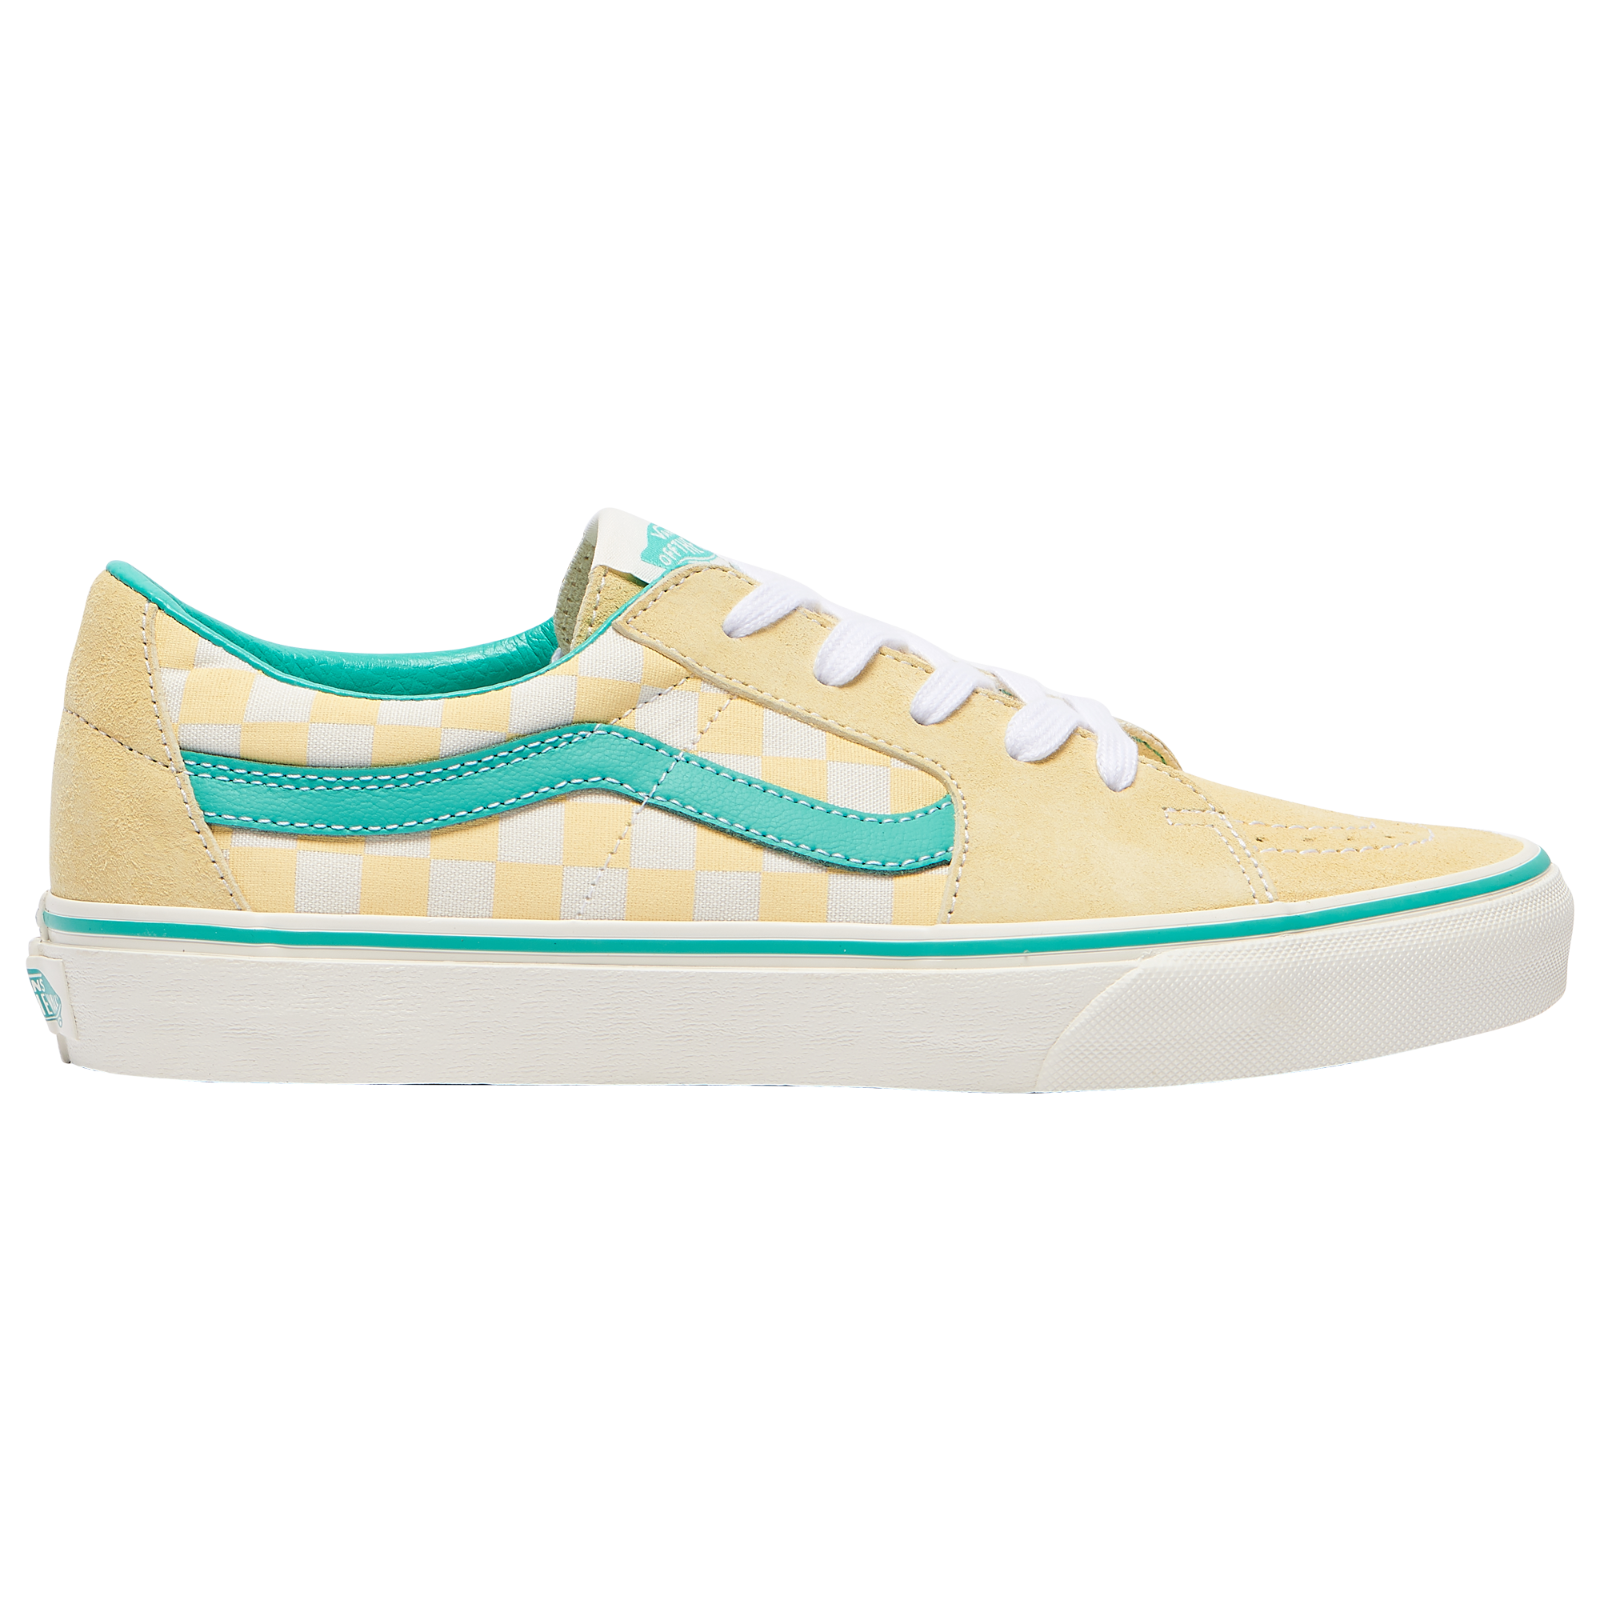 Vans SK8 Low Shoes Yellow Green Checkerboard VN0A4UUKP1T Men